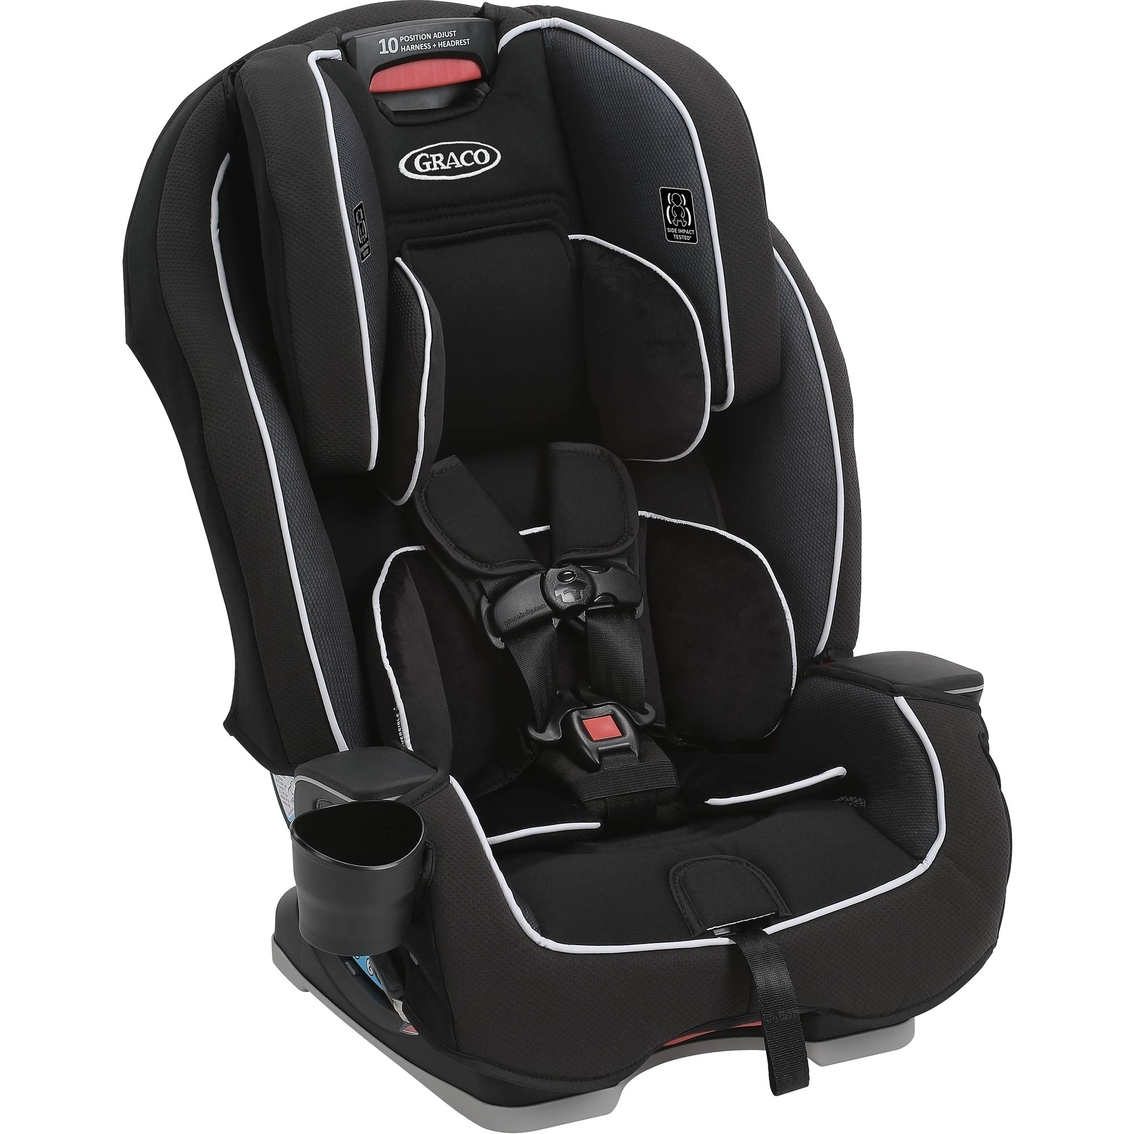 Graco Milestone All-in-1 Car Seat - Image 3 of 4